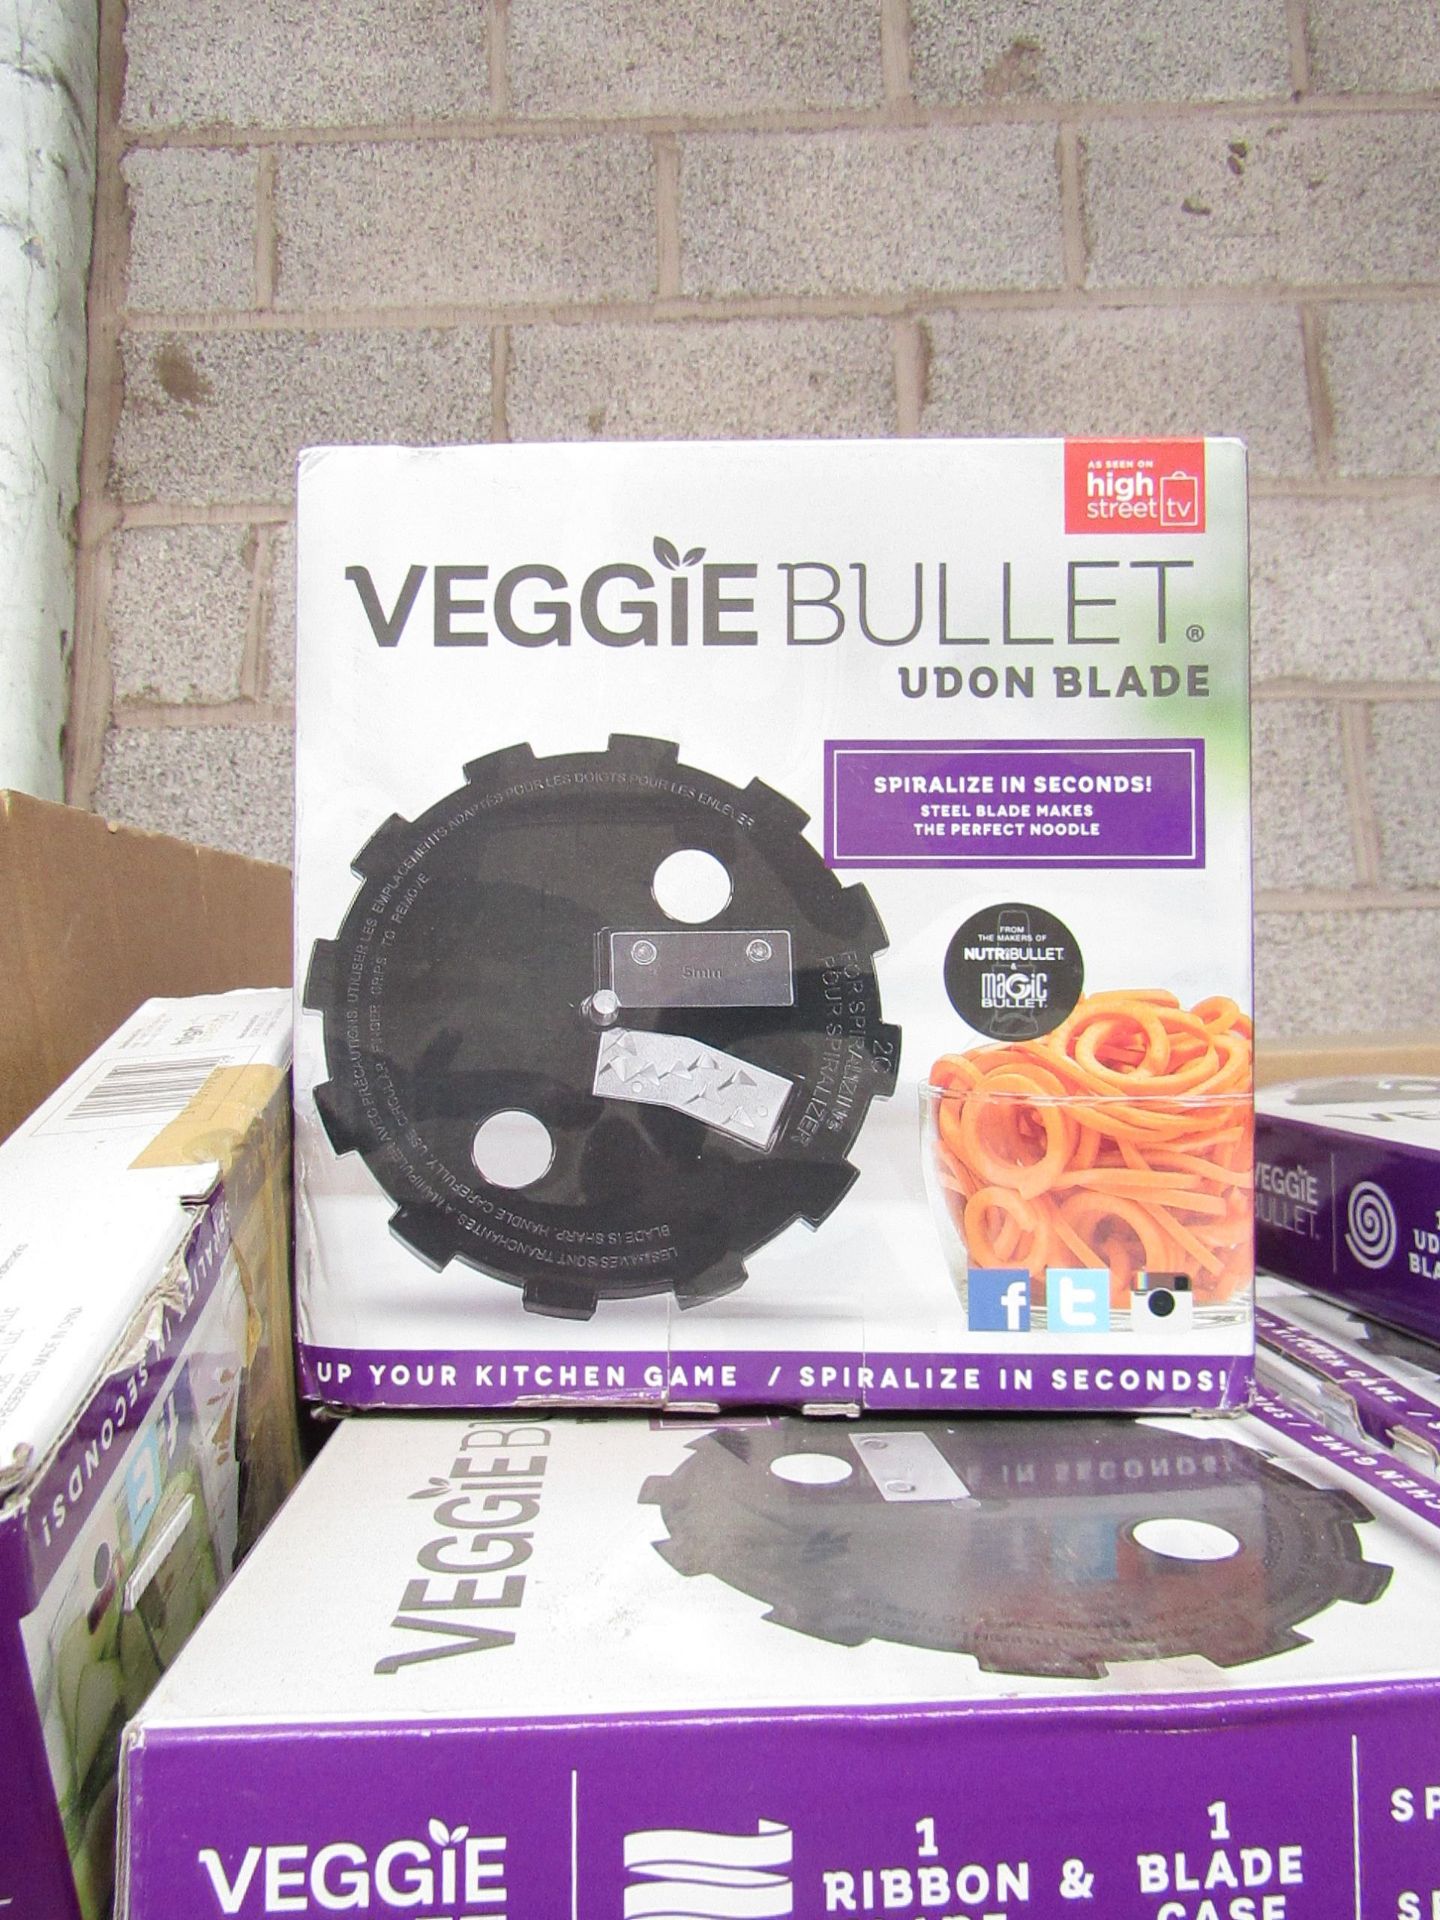 | 2X | BOX CONTAINING 20 UNITS OF 14 VEGGIE BULLET RIBBON BLADES | NEW AND BOXED | NO ONLINE